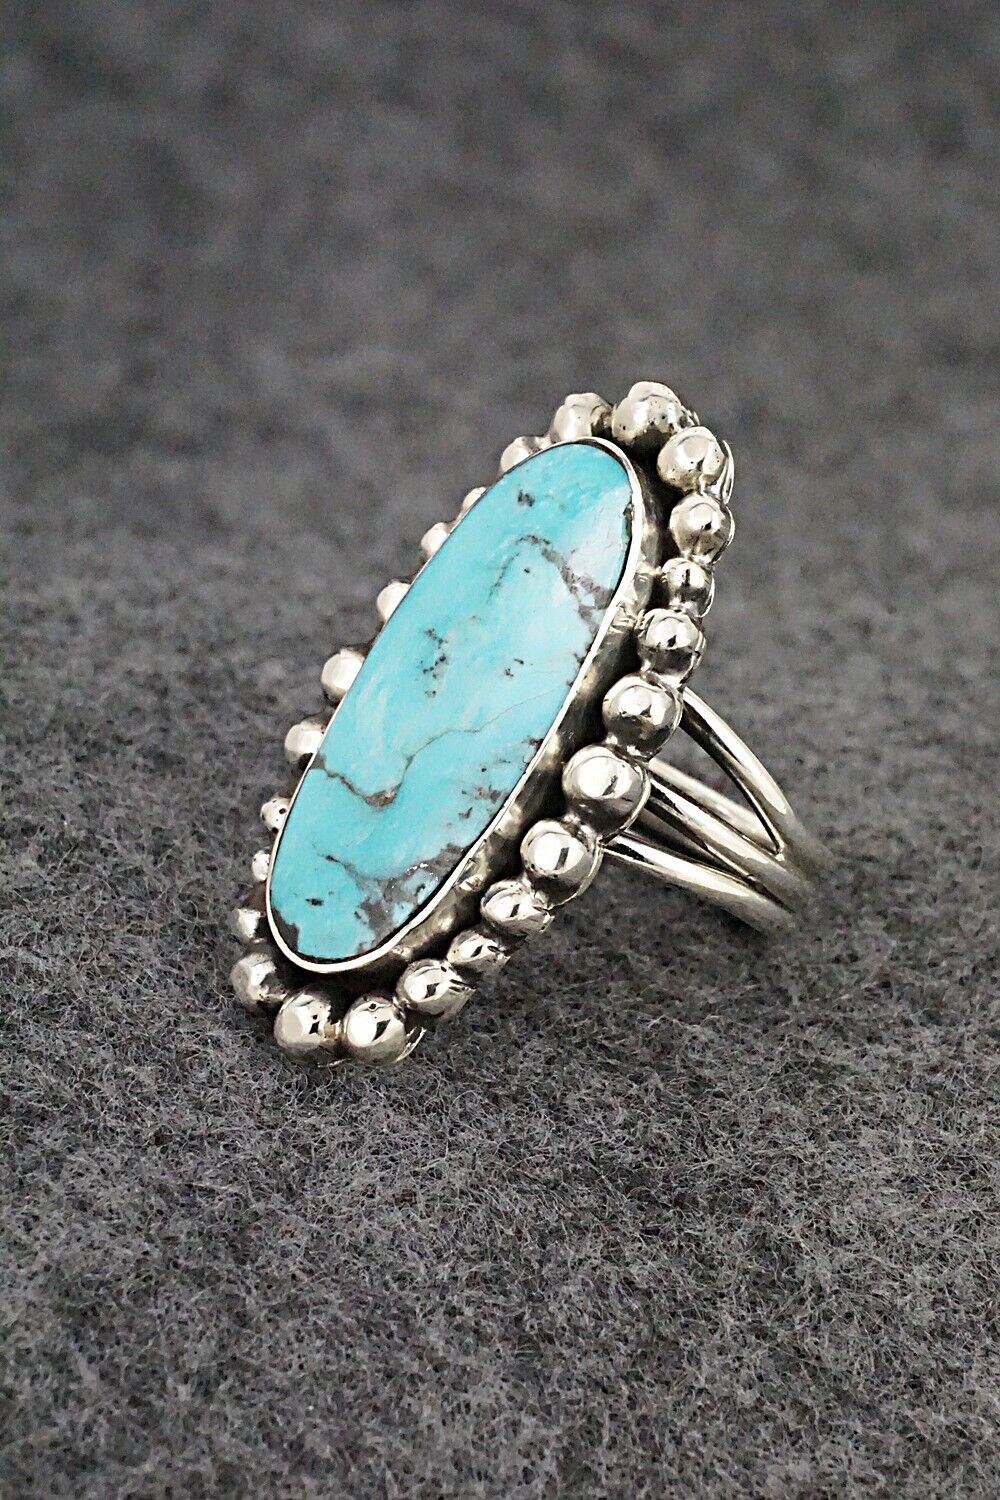 Turquoise & Sterling Silver Ring - Clarence Long - Size 5.5